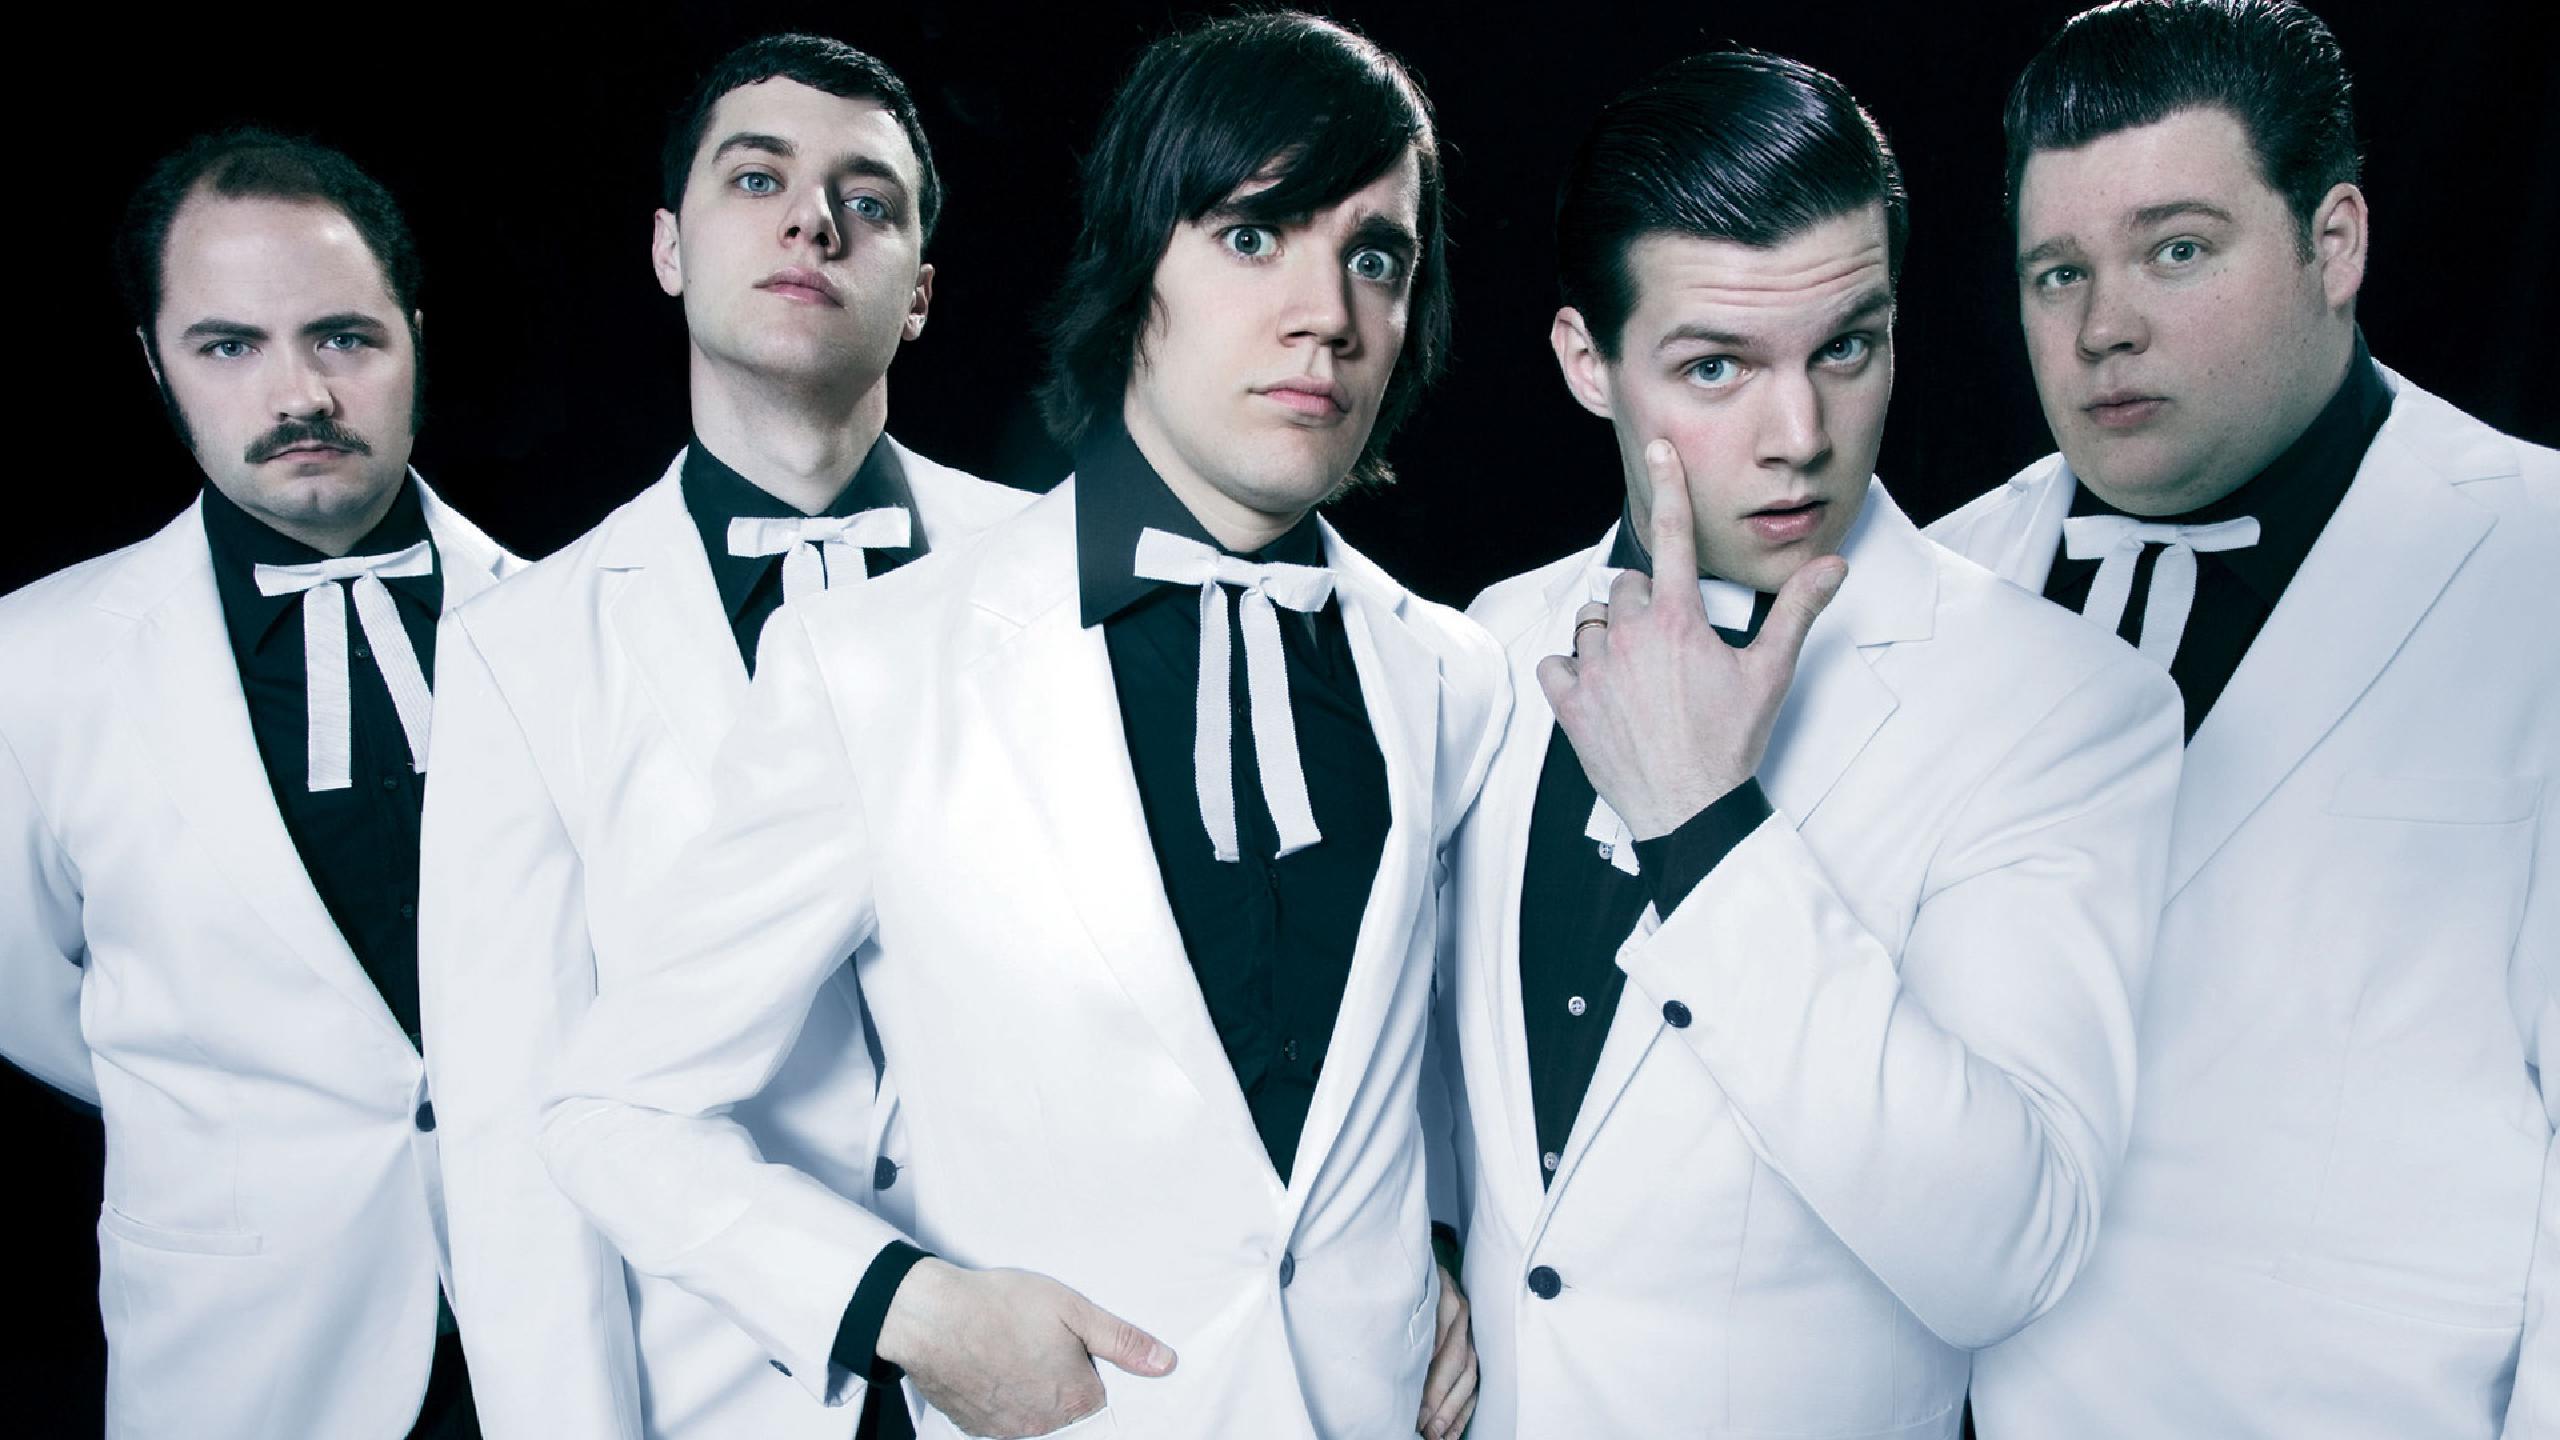 the hives tour history